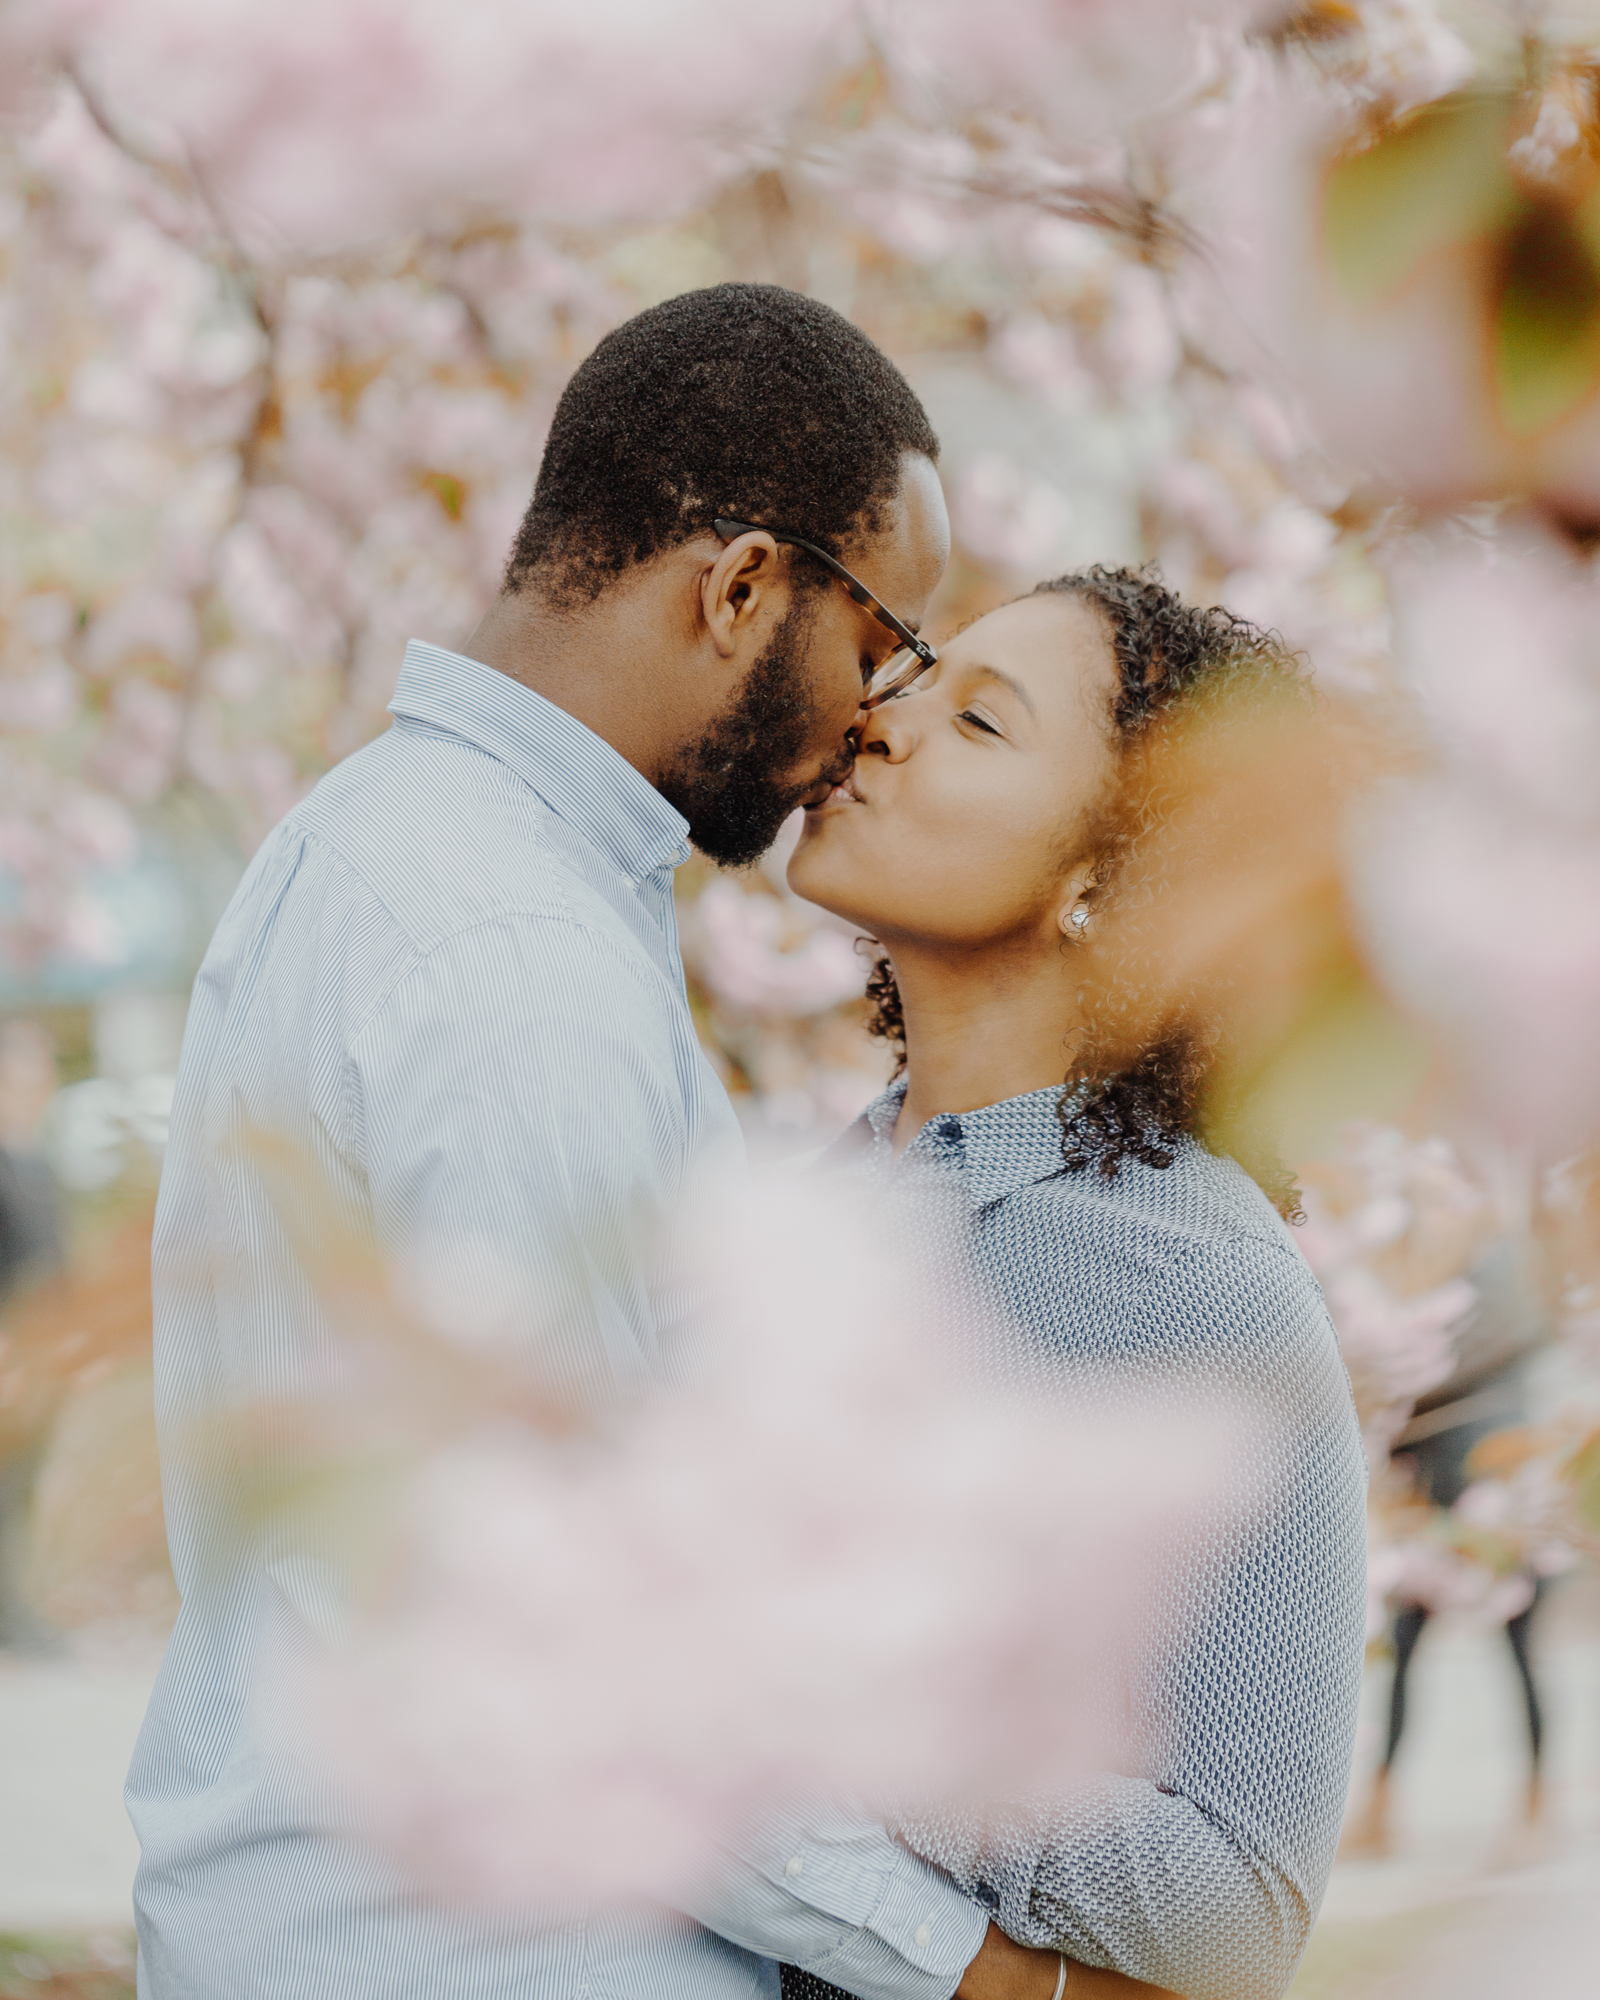 Intimate Prospect Park Photography with Spring Blossoms